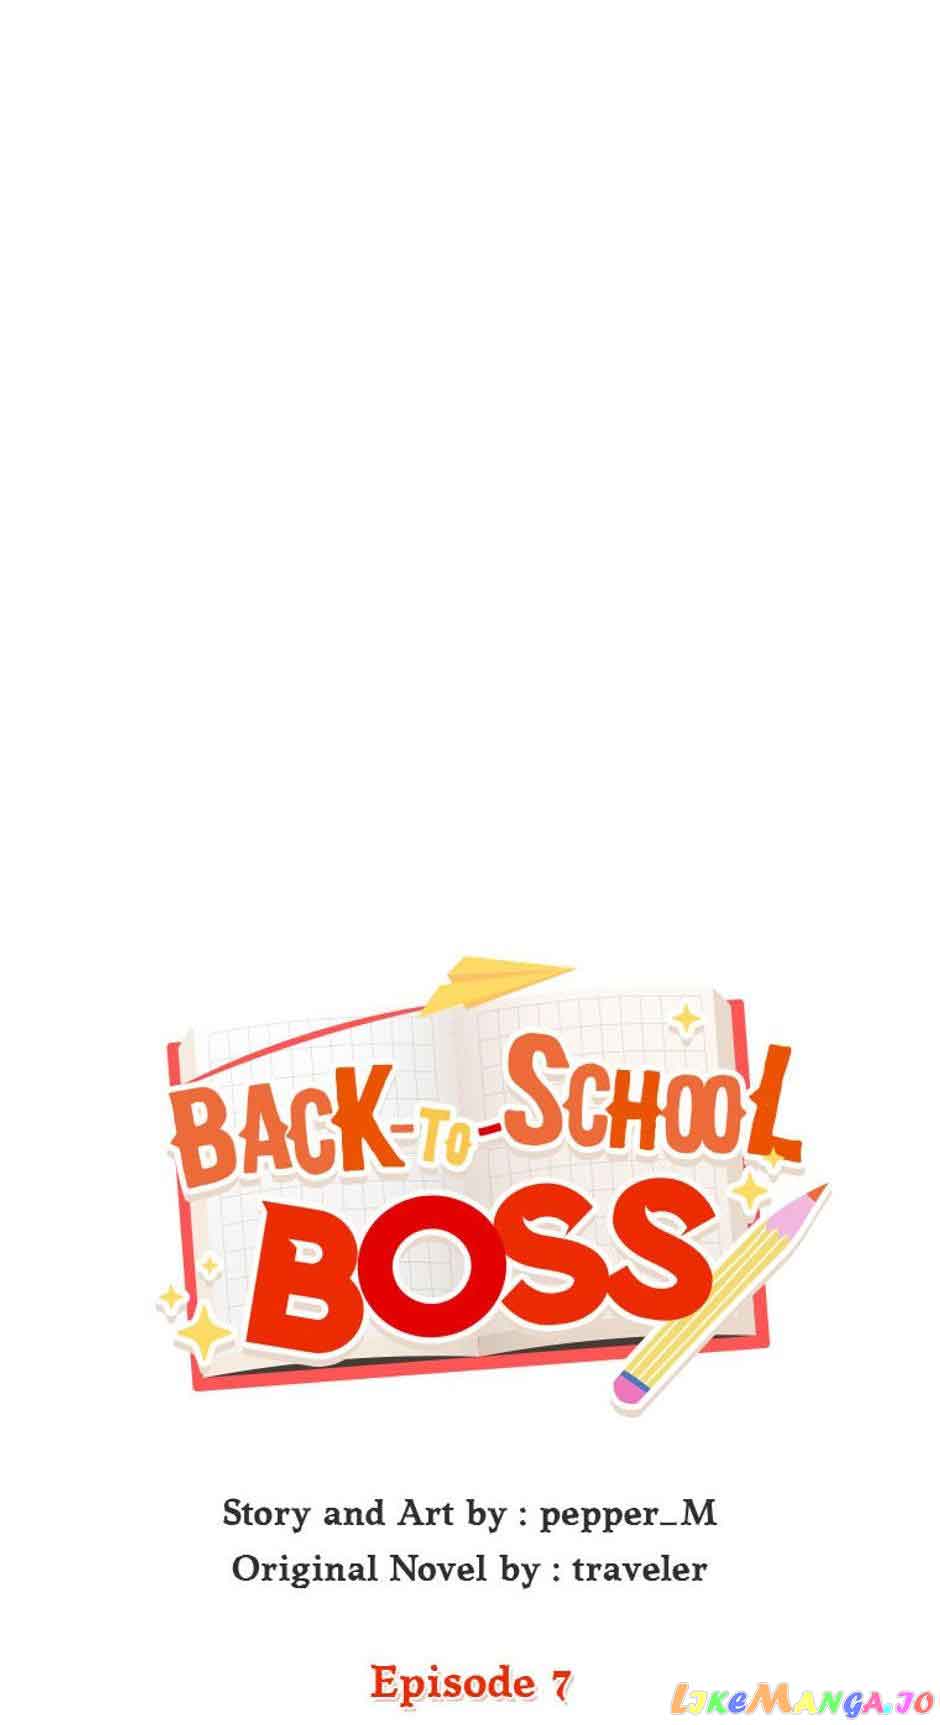 Back-to-School Boss chapter 7